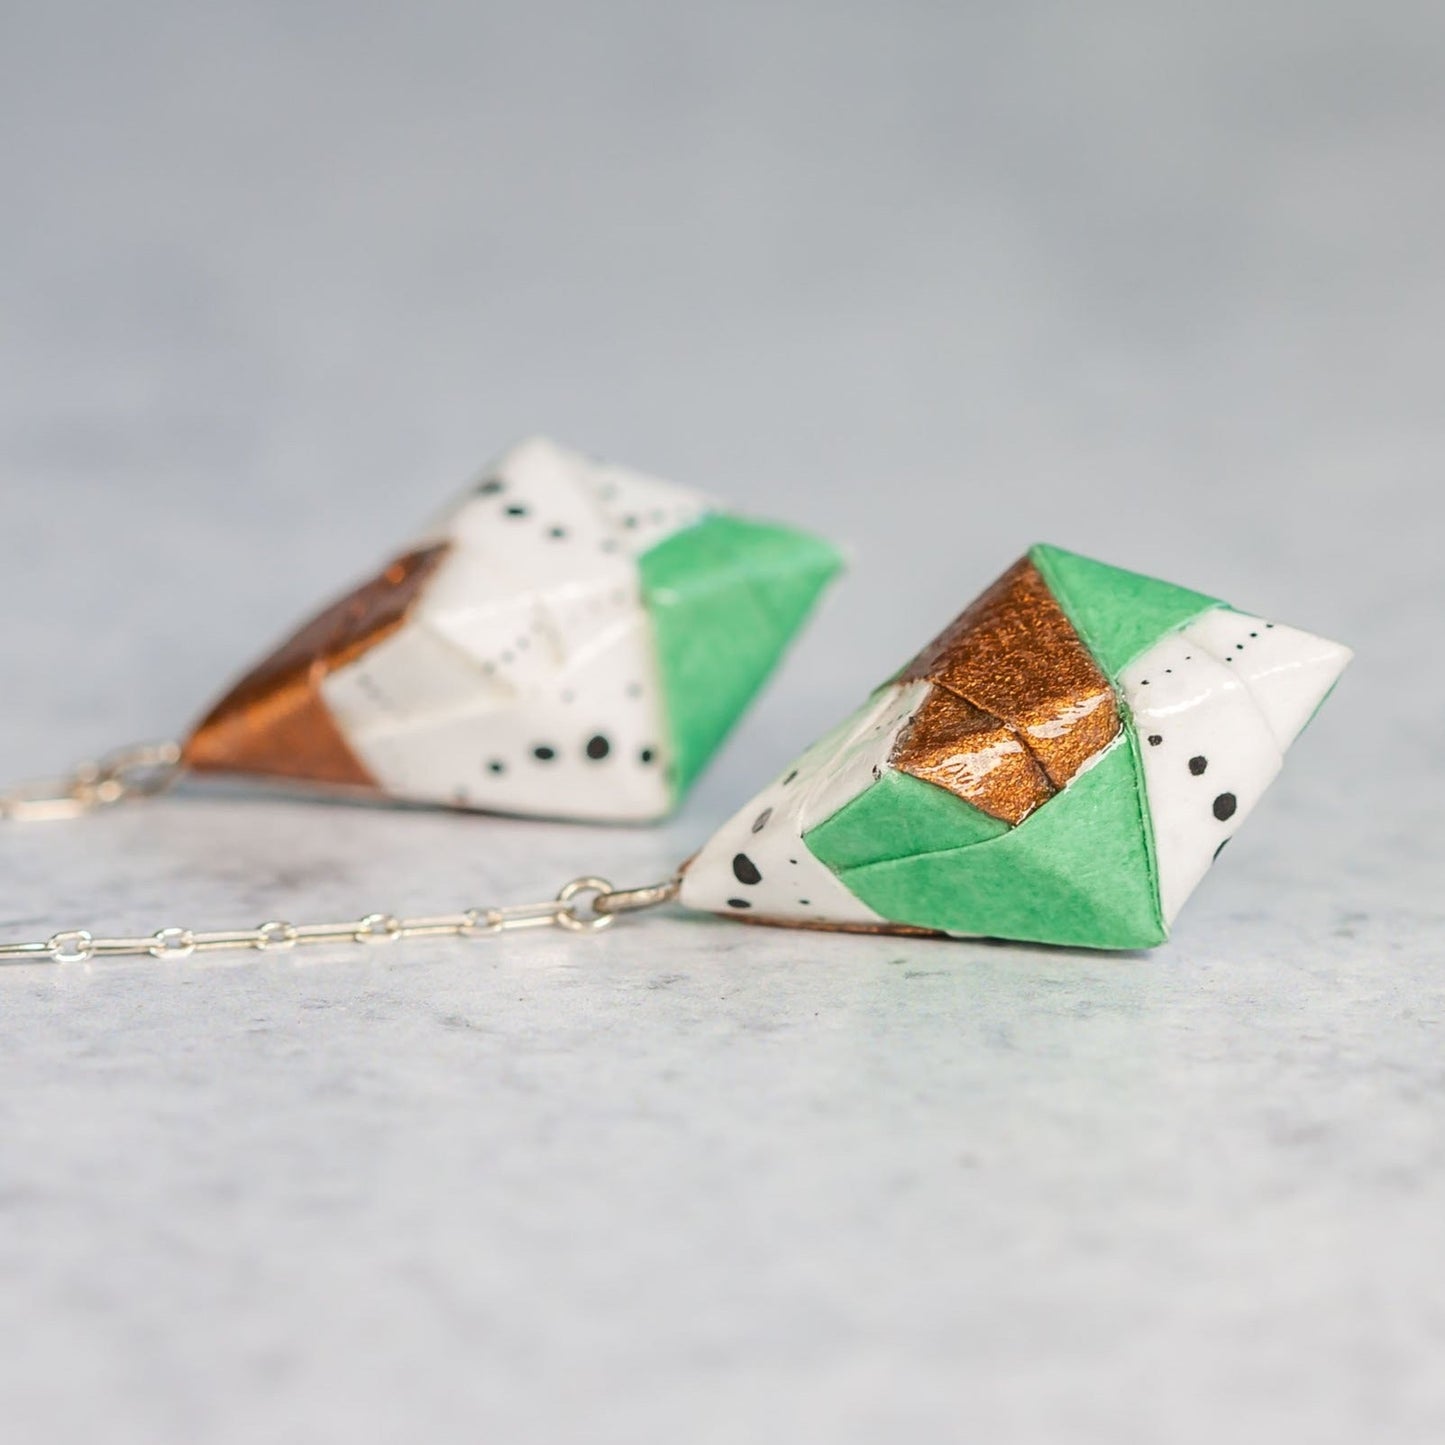 Origami Diamond Paper Earrings - Circle Dot Copper Wasabi - By LeeMo Designs in Bend, Oregon